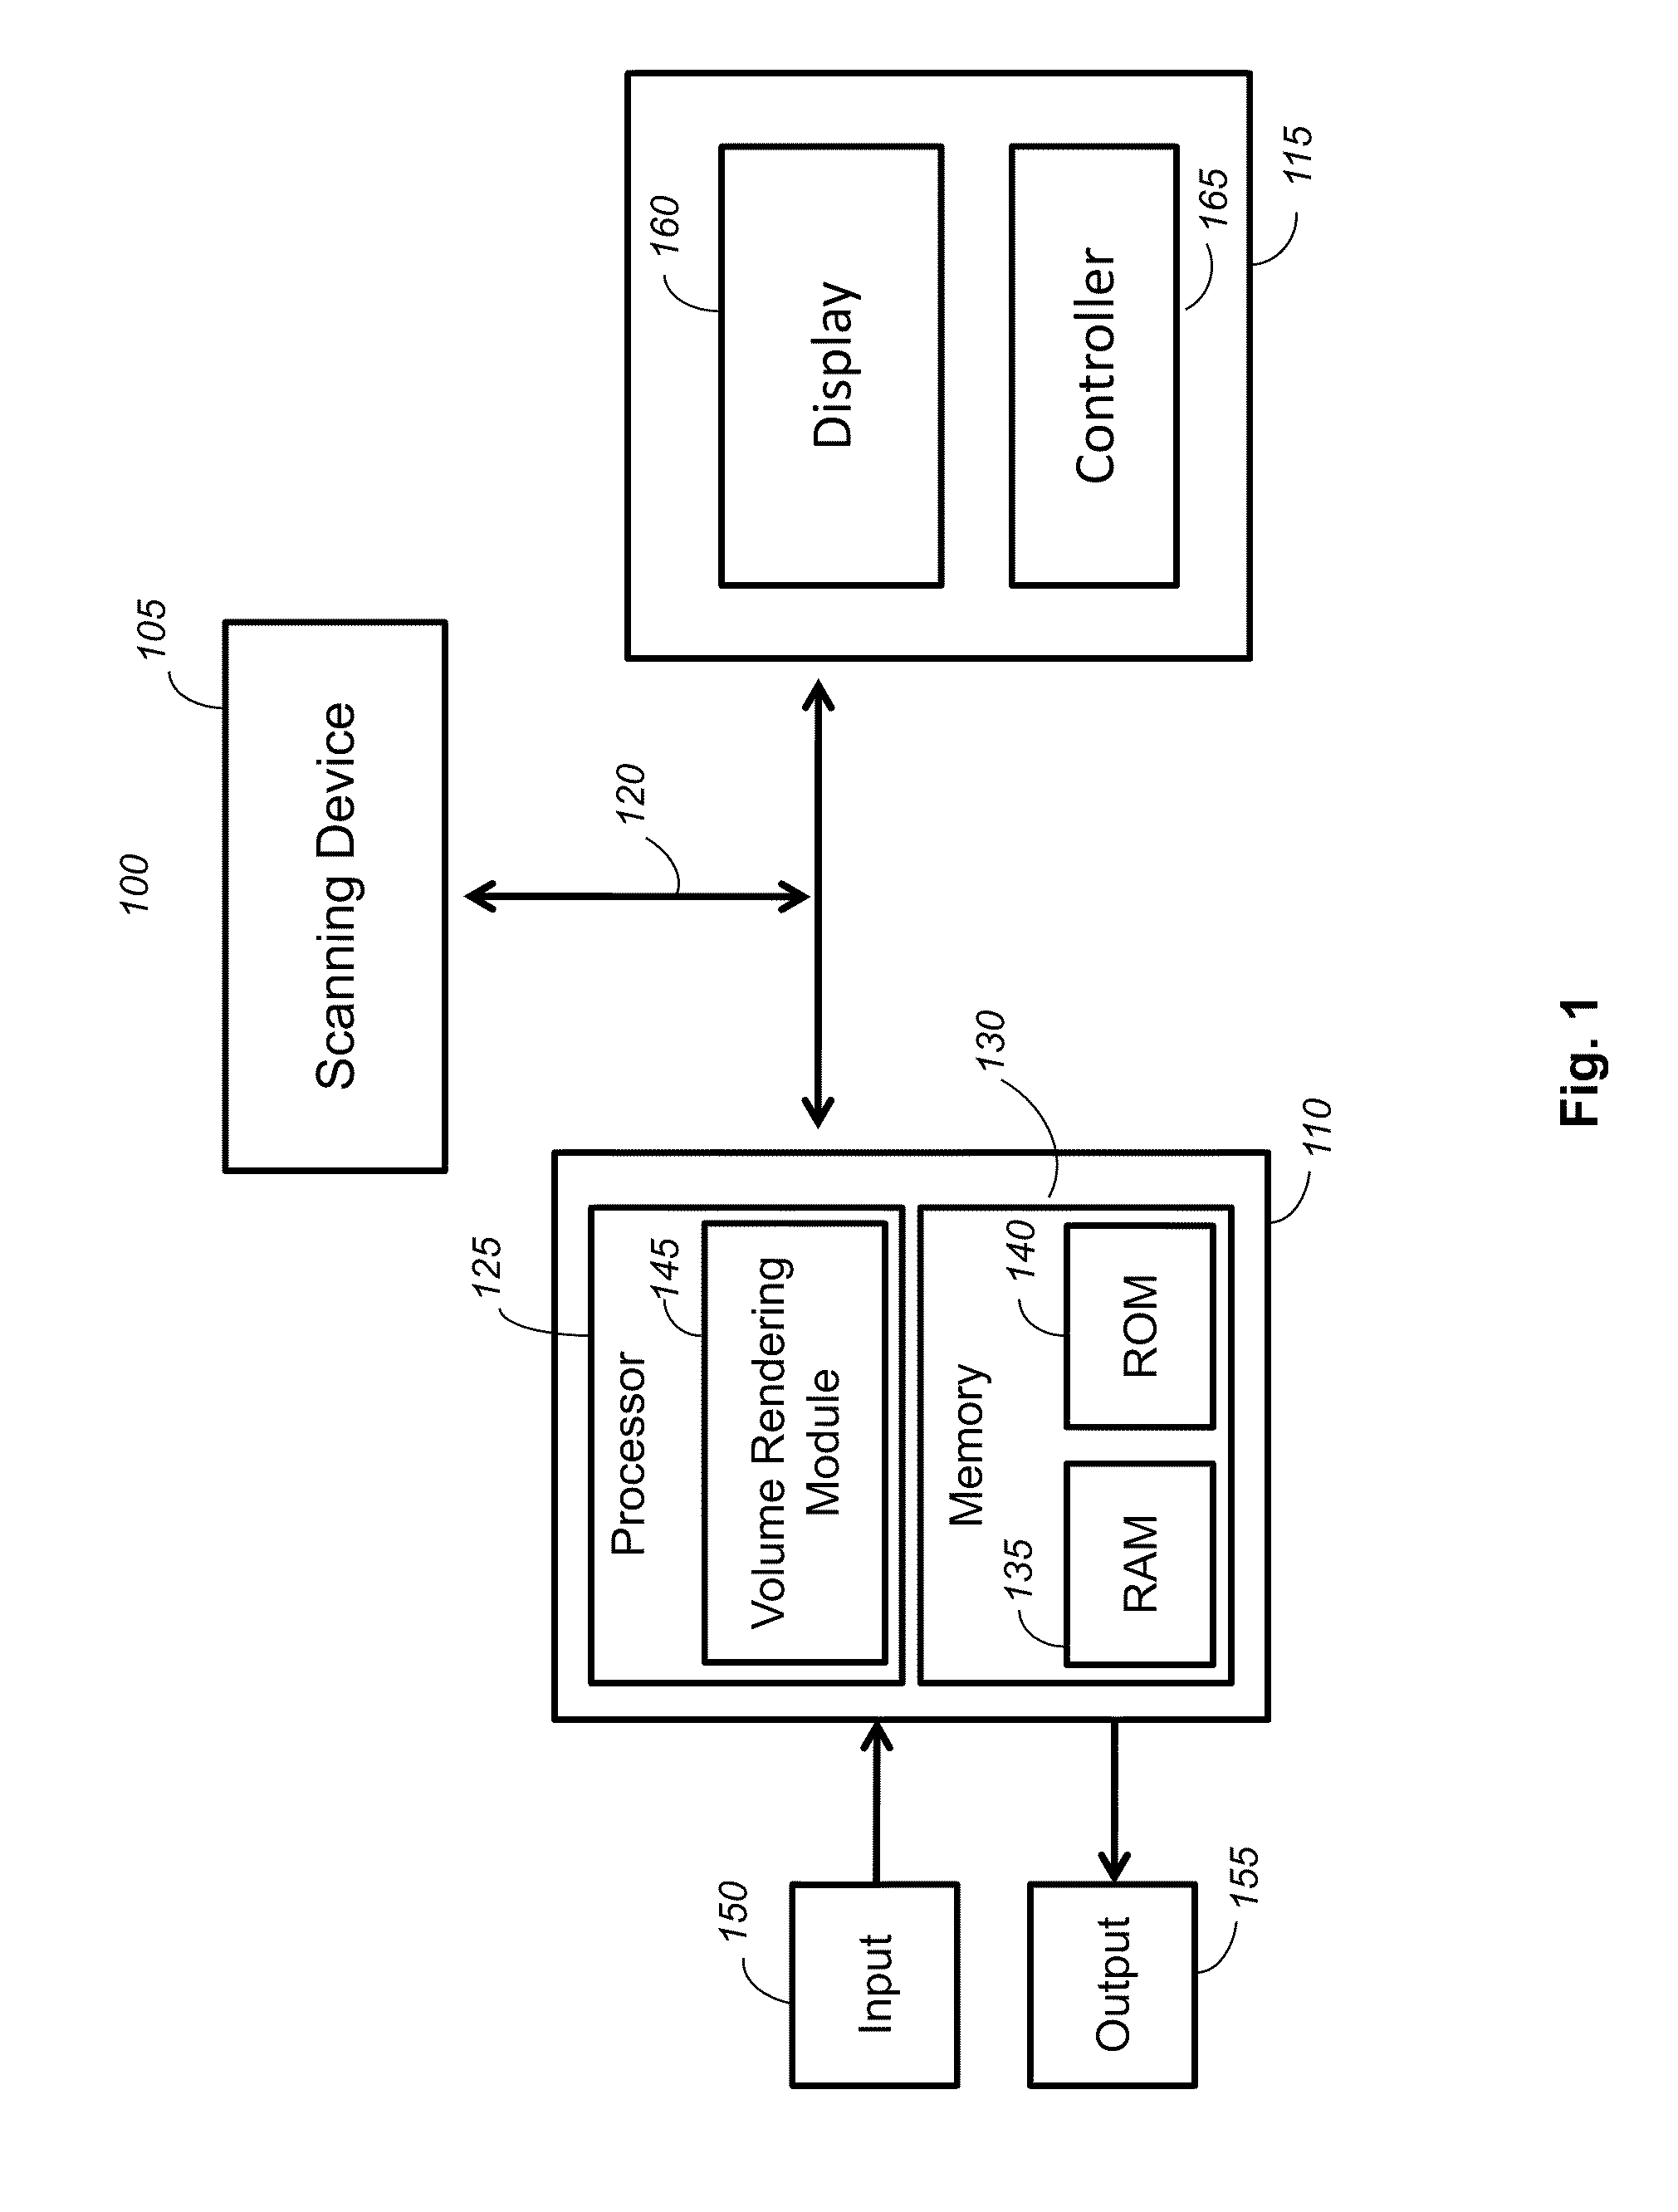 System and method for performing volume rendering using shadow calculation